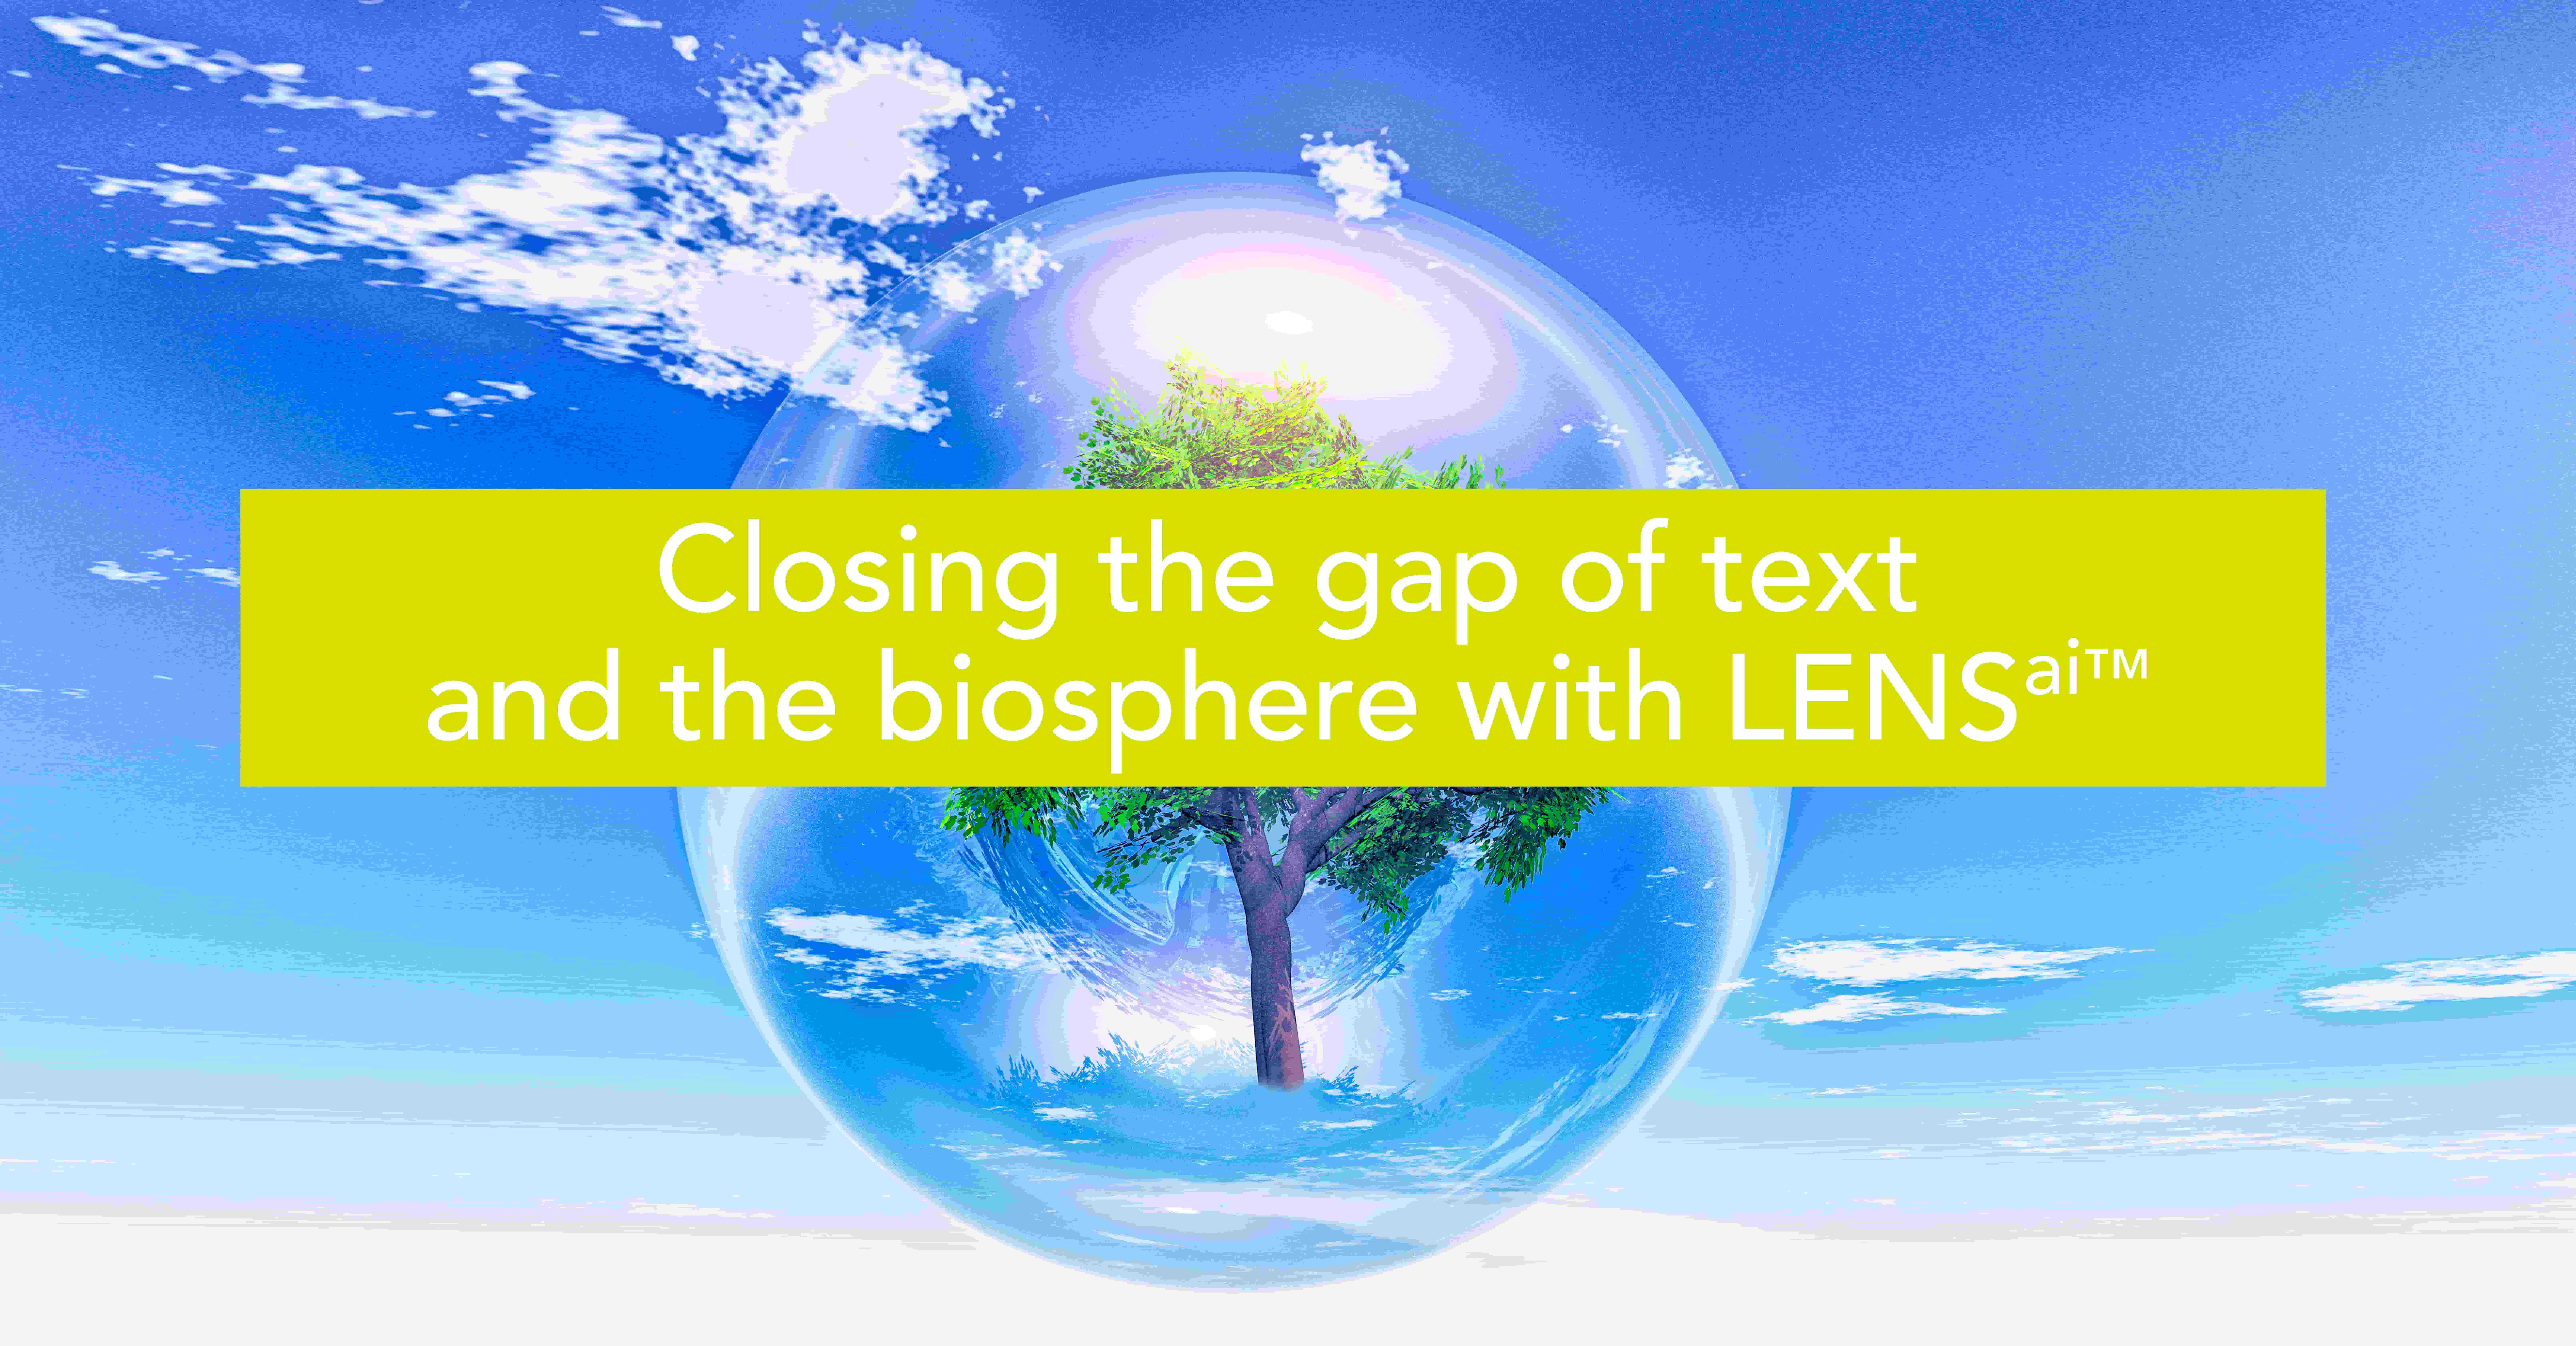 Closing the gap of text and the biosphere with LENS<sup>ai™</sup>